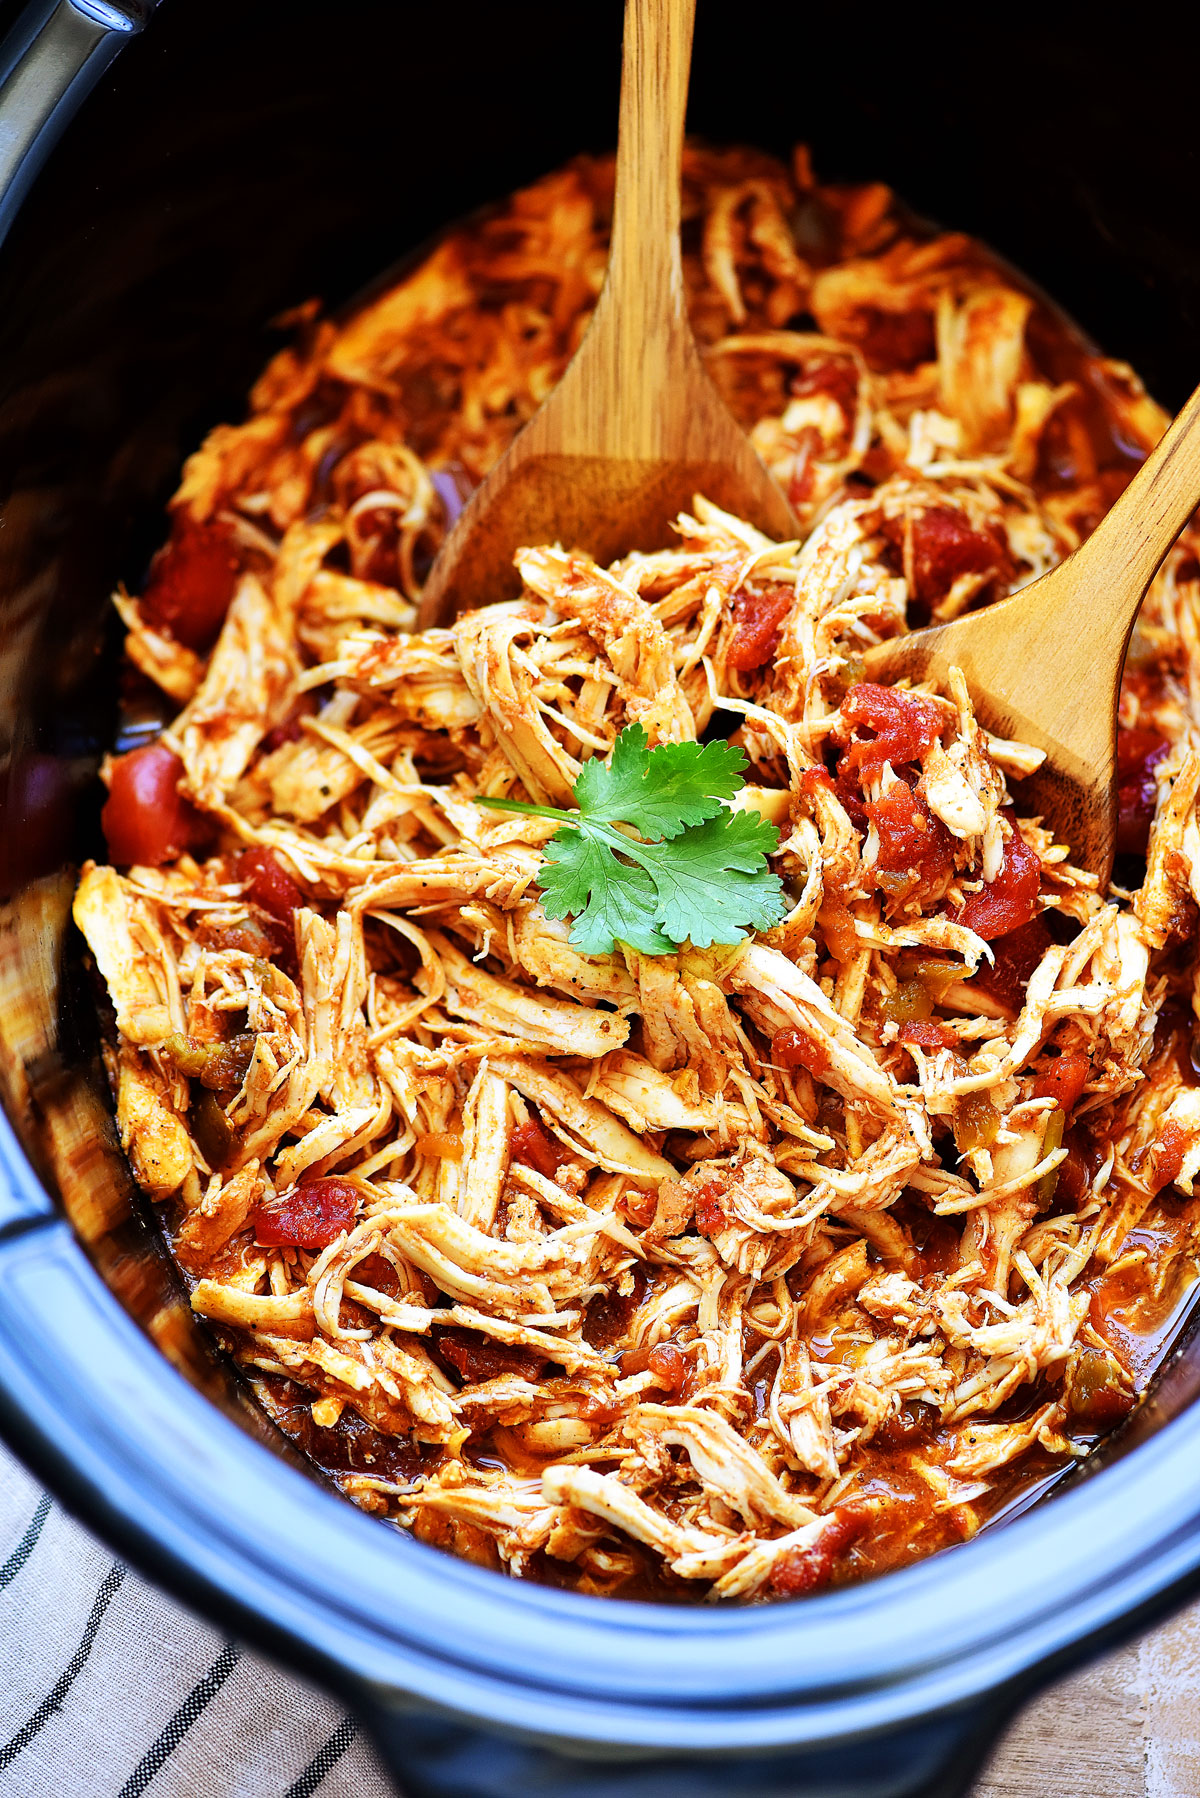 Slow Cooker Shredded Chicken that is filled with Mexican seasonings. Life-in-the-Lofthouse.com